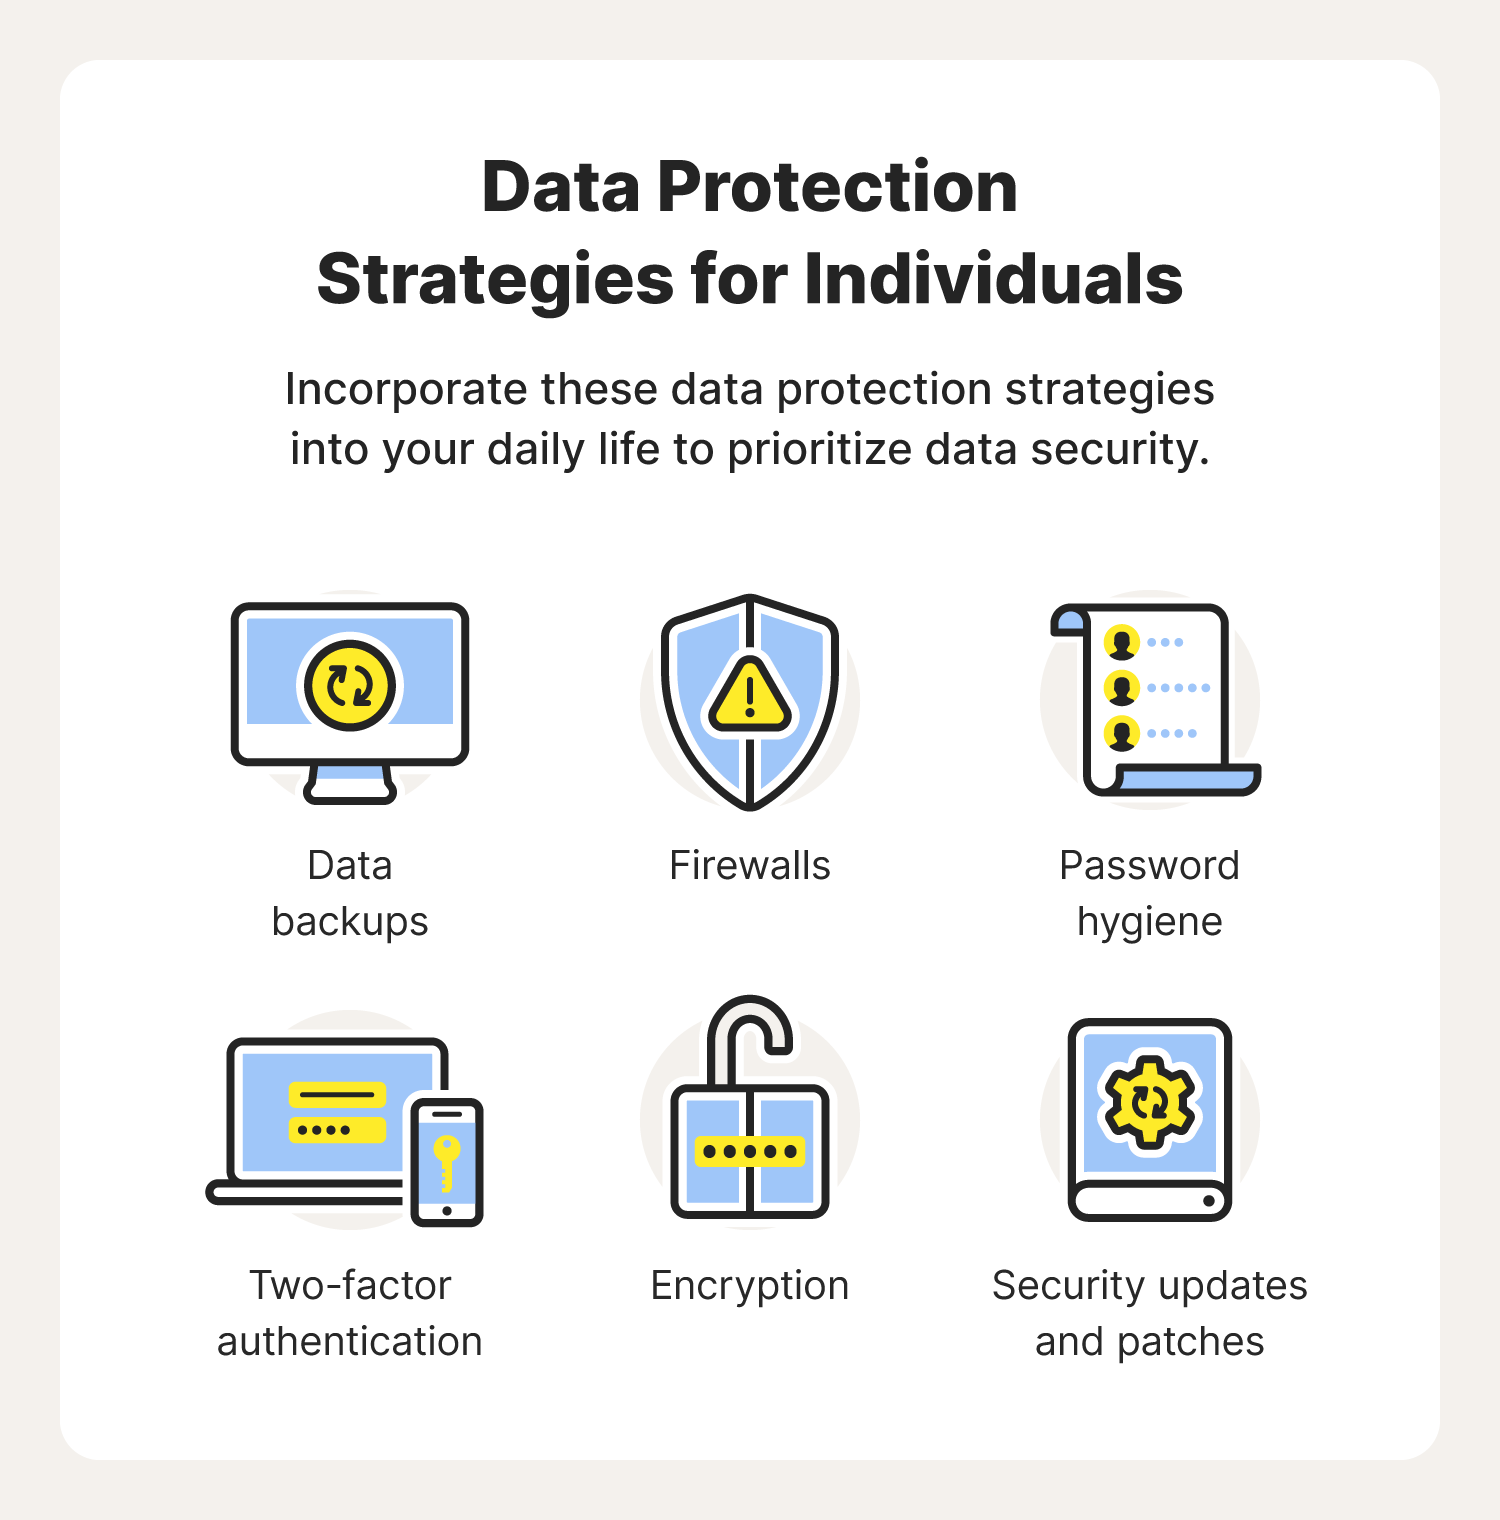 Six illustrations accompany data protection strategies for individuals.  